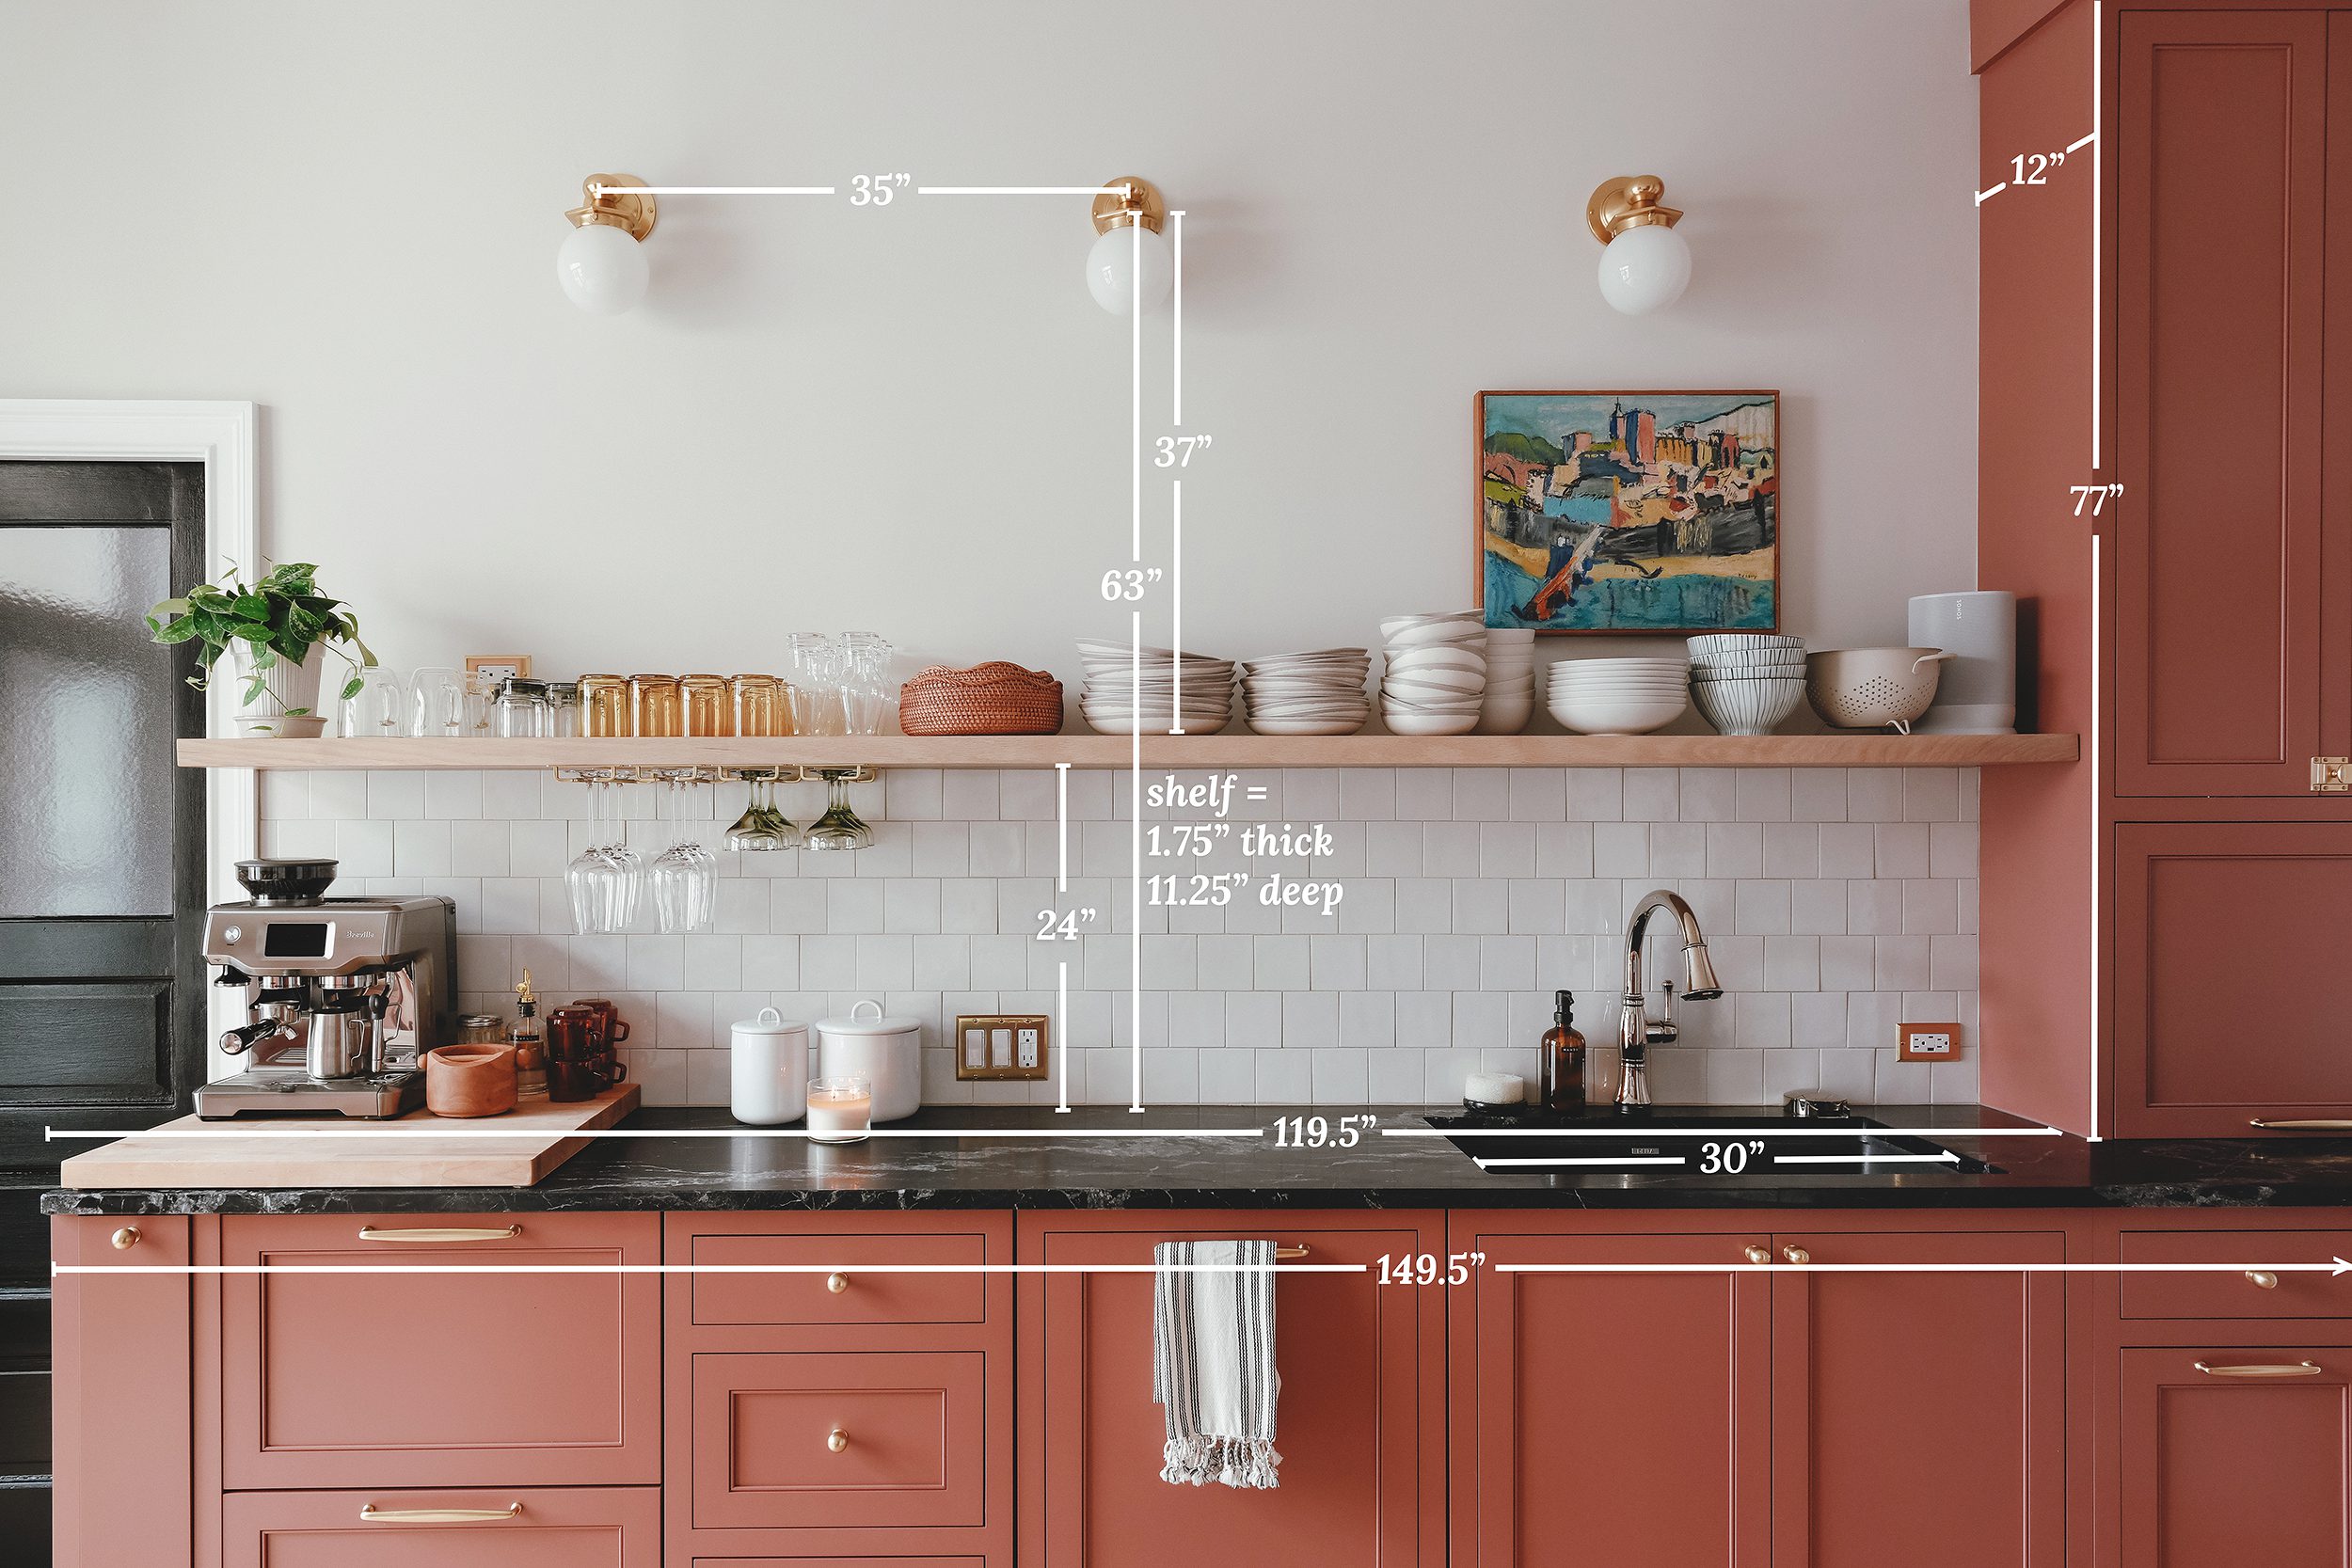 The measurements of the sink wall // via Yellow Brick Home